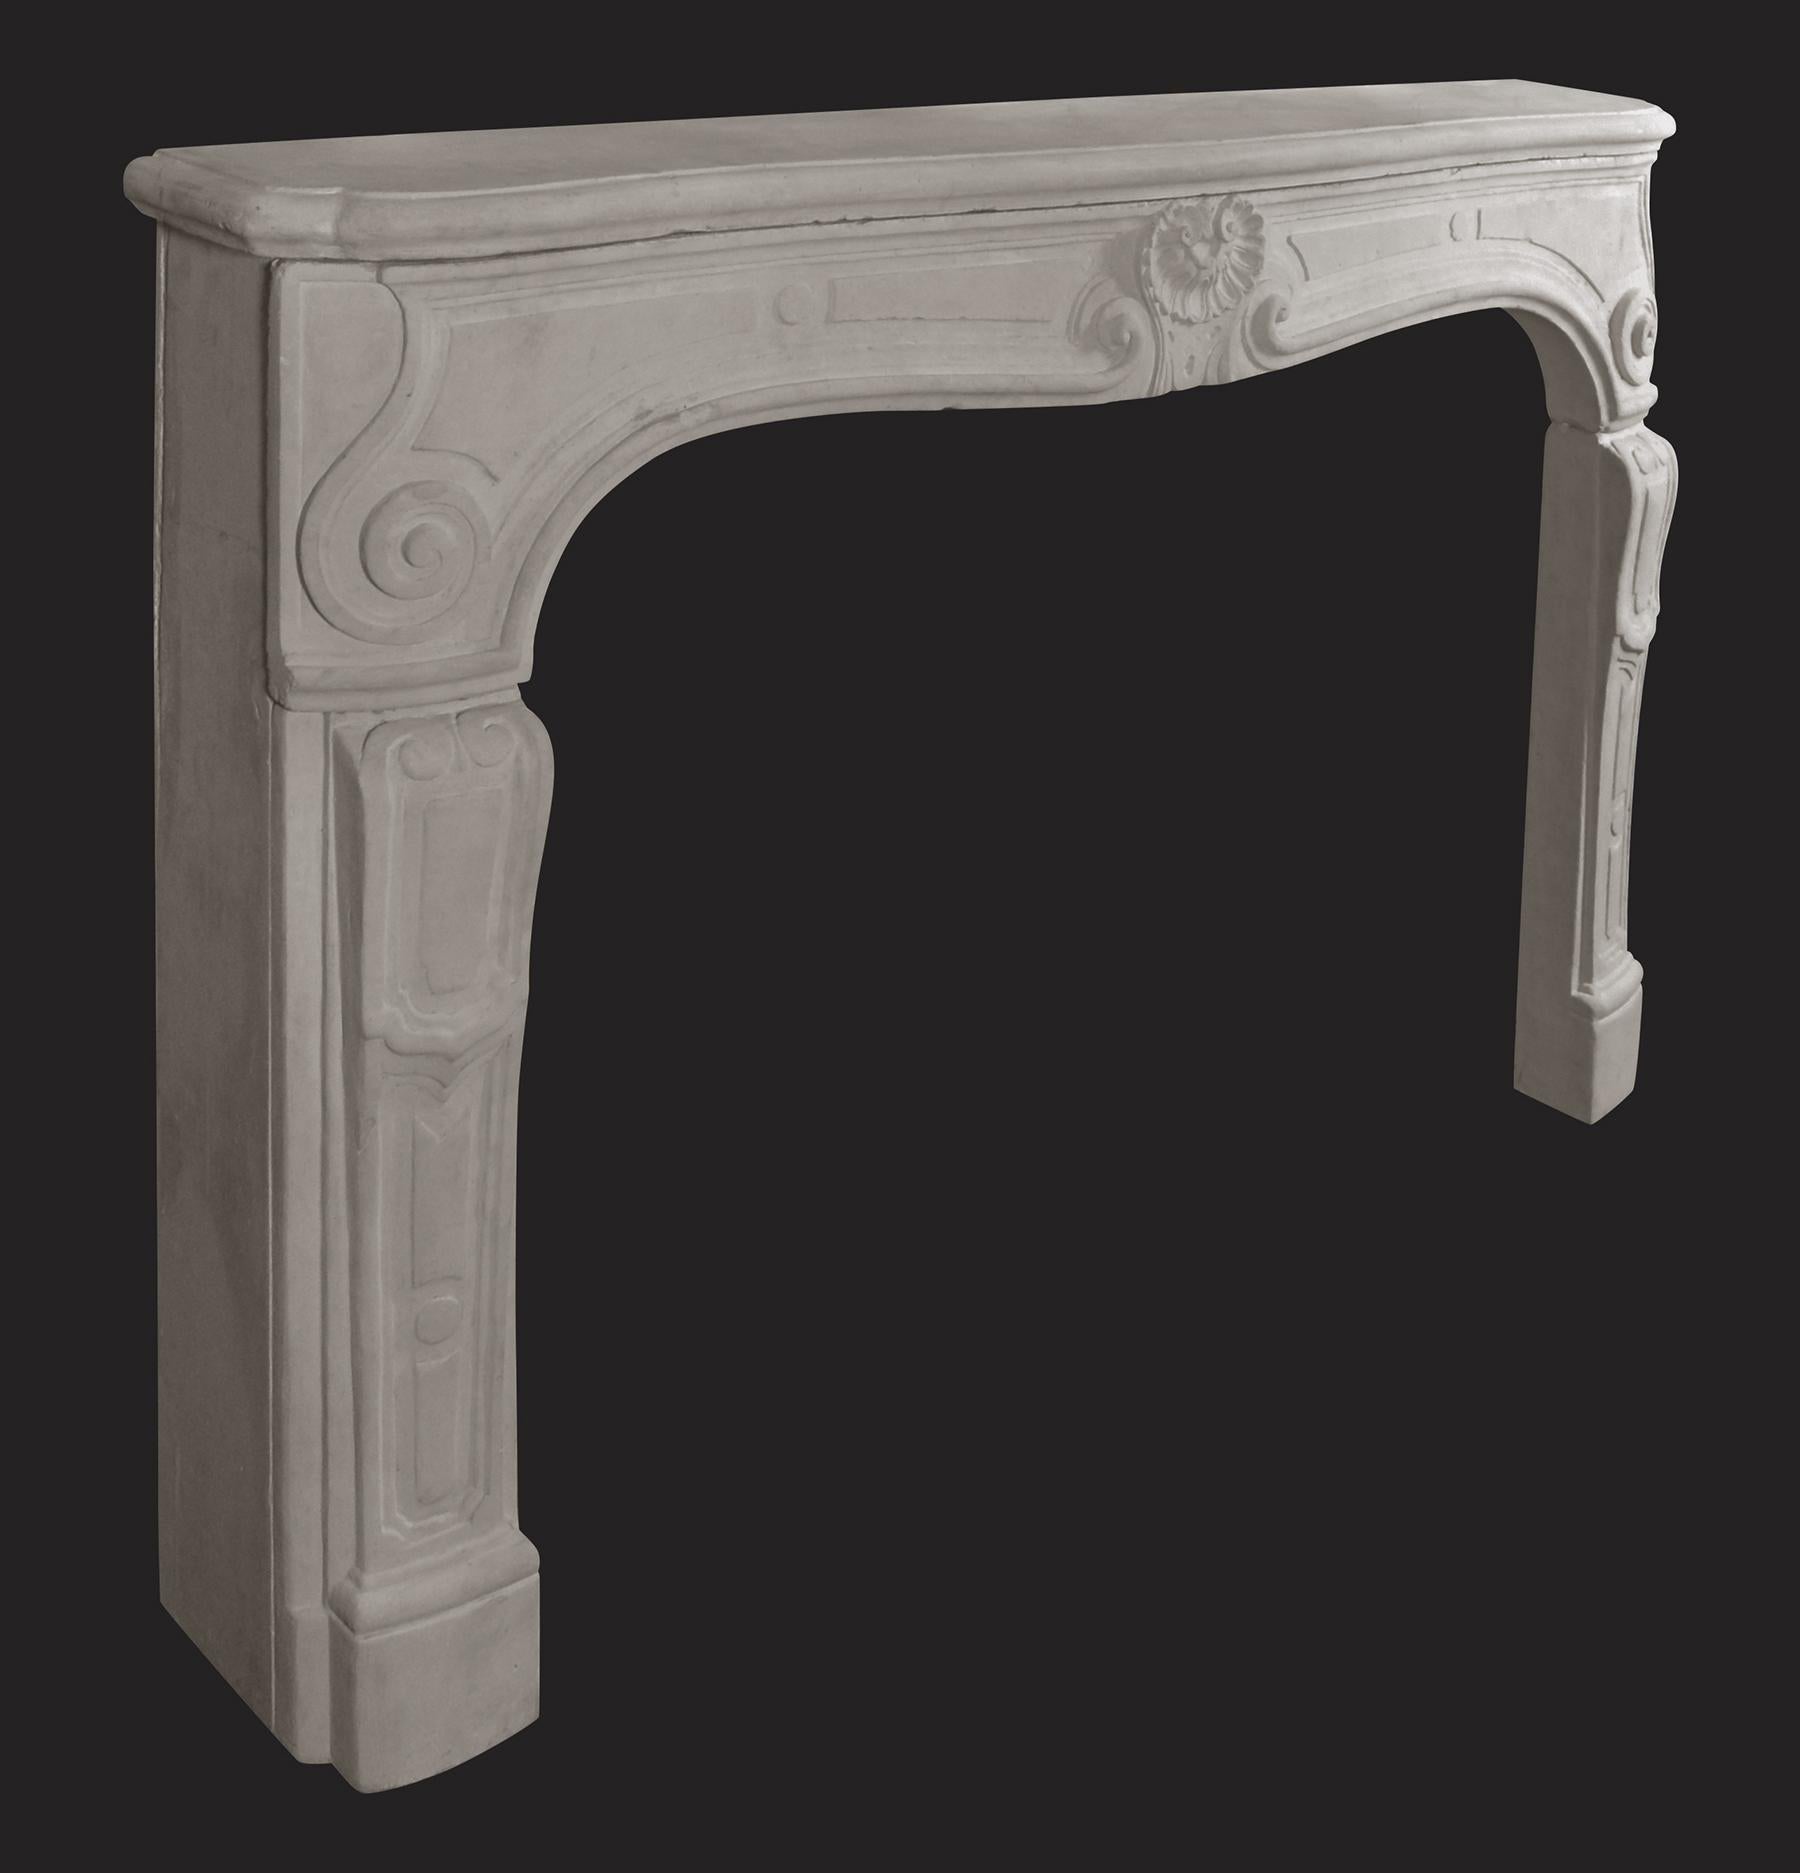 A French Louis XV antique stone fireplace with panelled console jambs supporting the carved scrolled entablature with central shell over scrolls. Restored.

Internal Width: 52.25